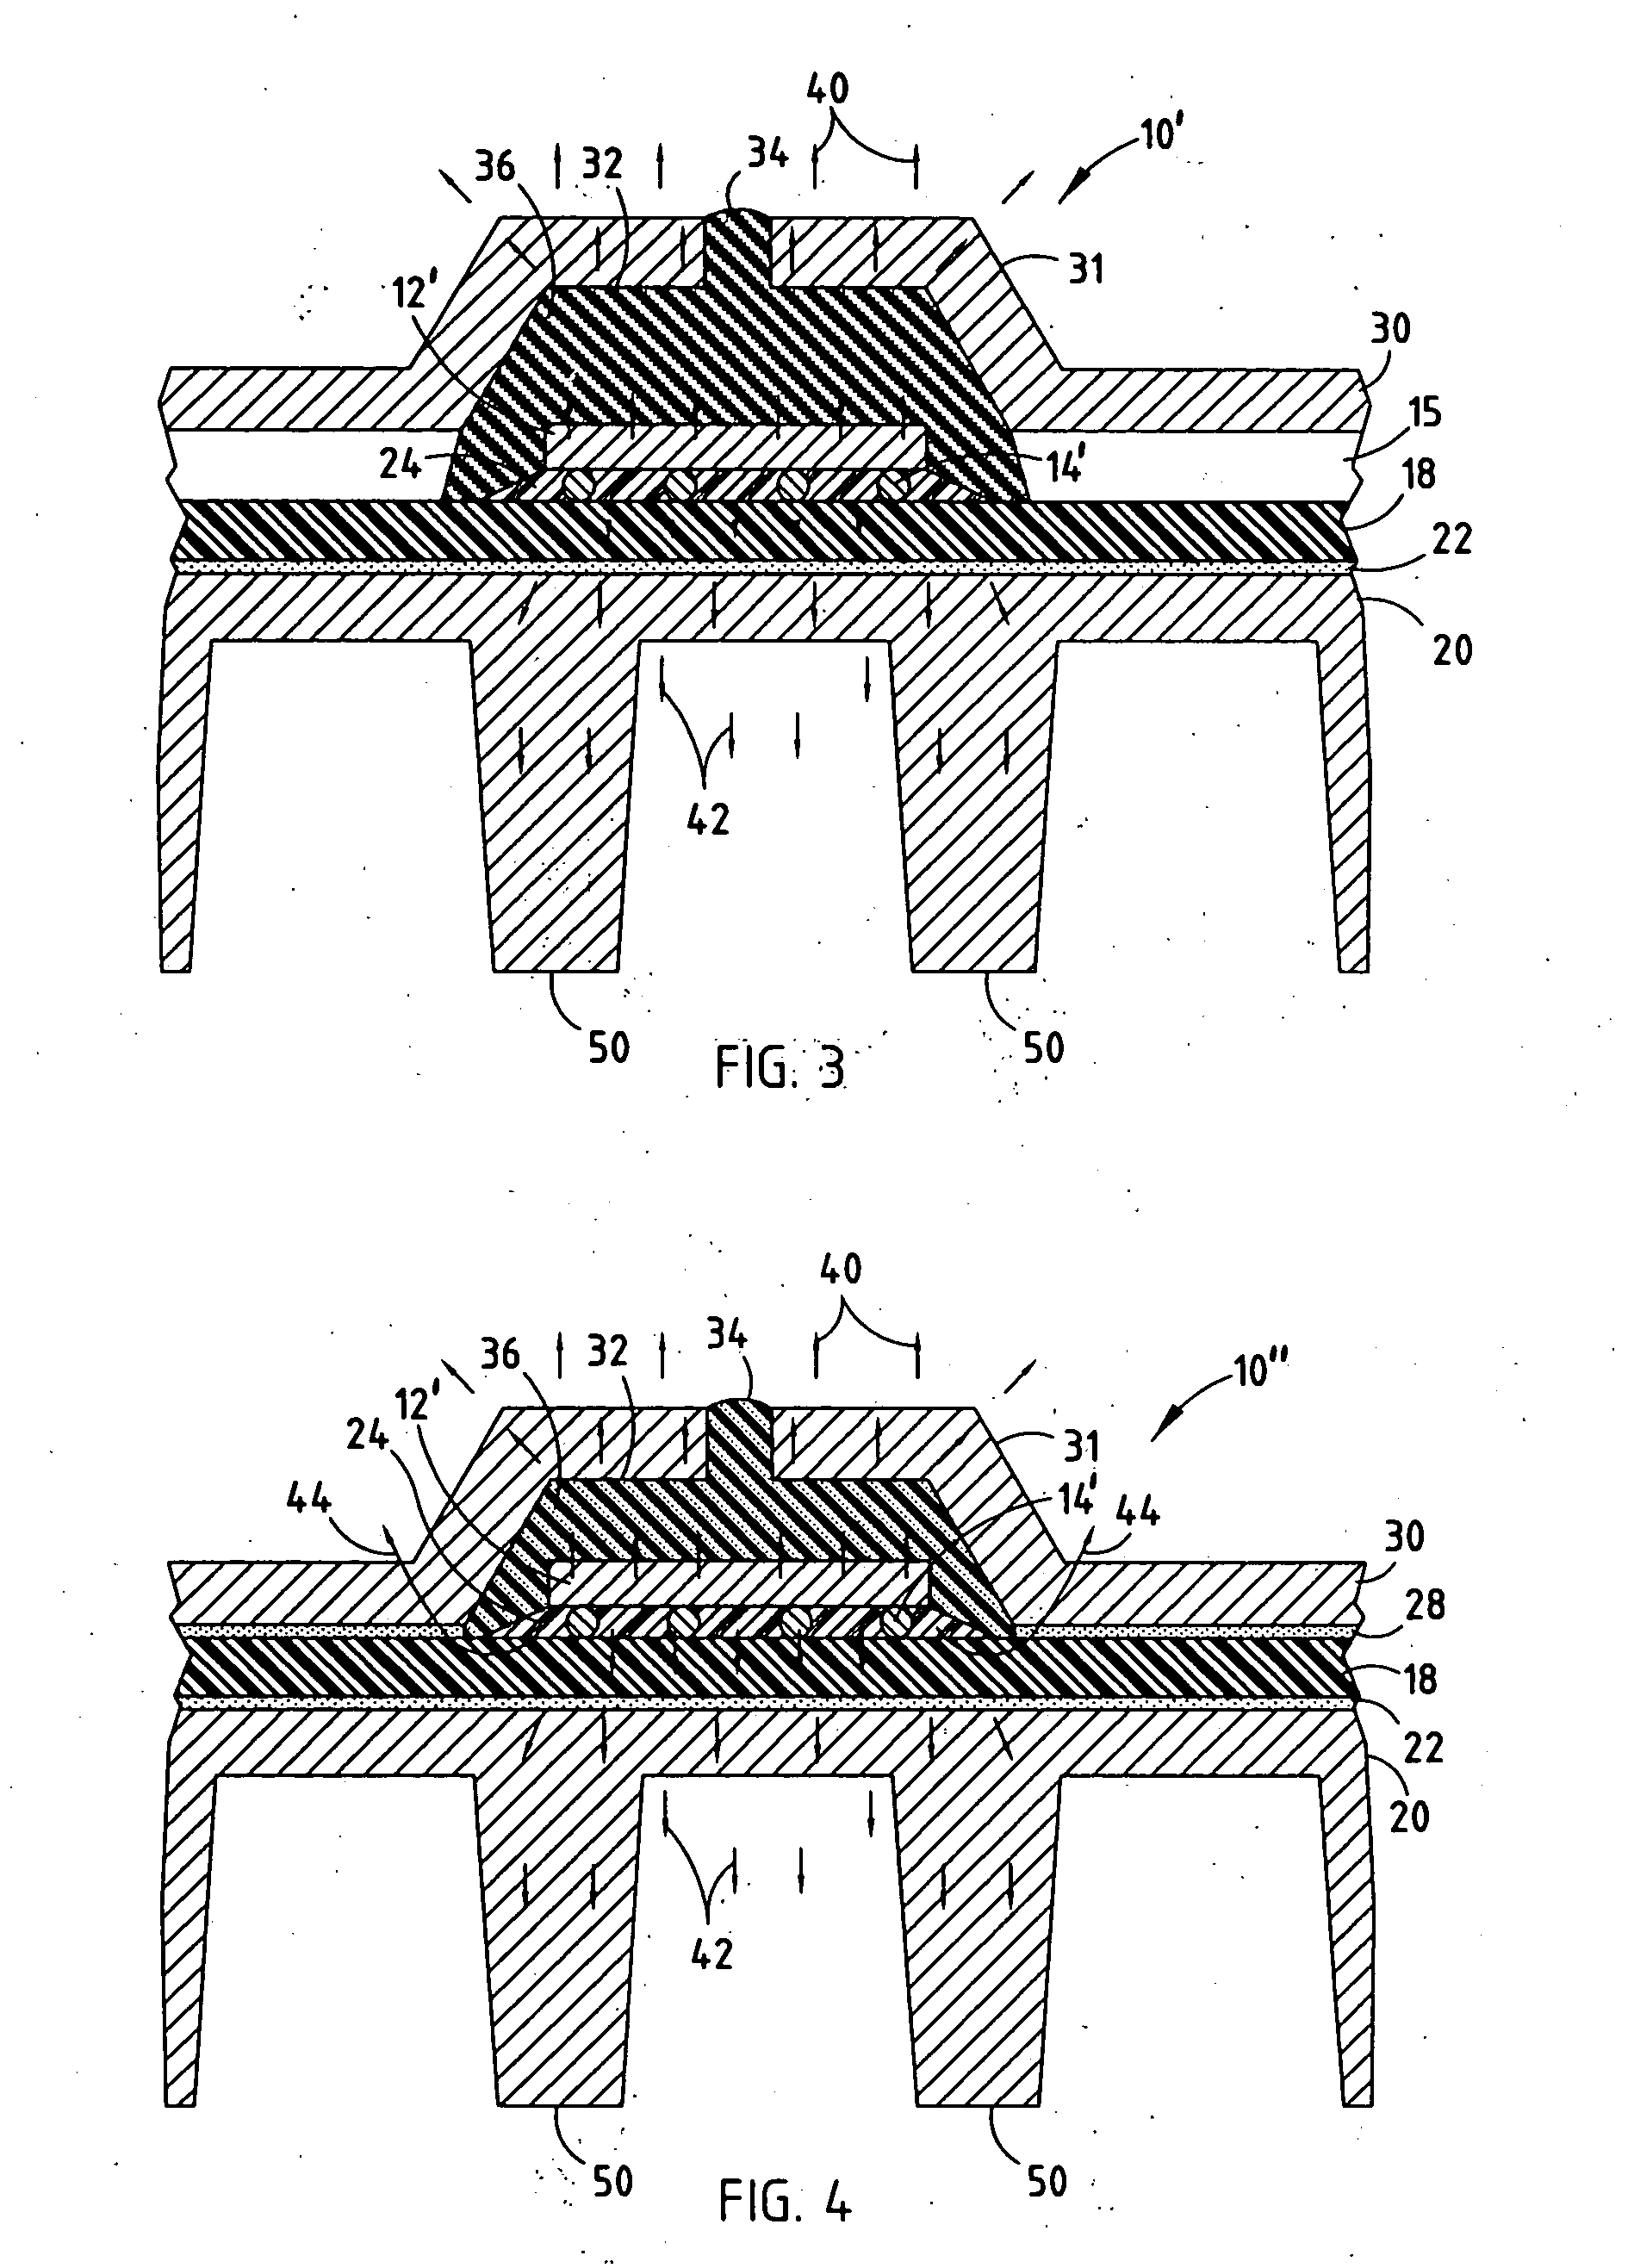 Semiconductor device heat sink package and method